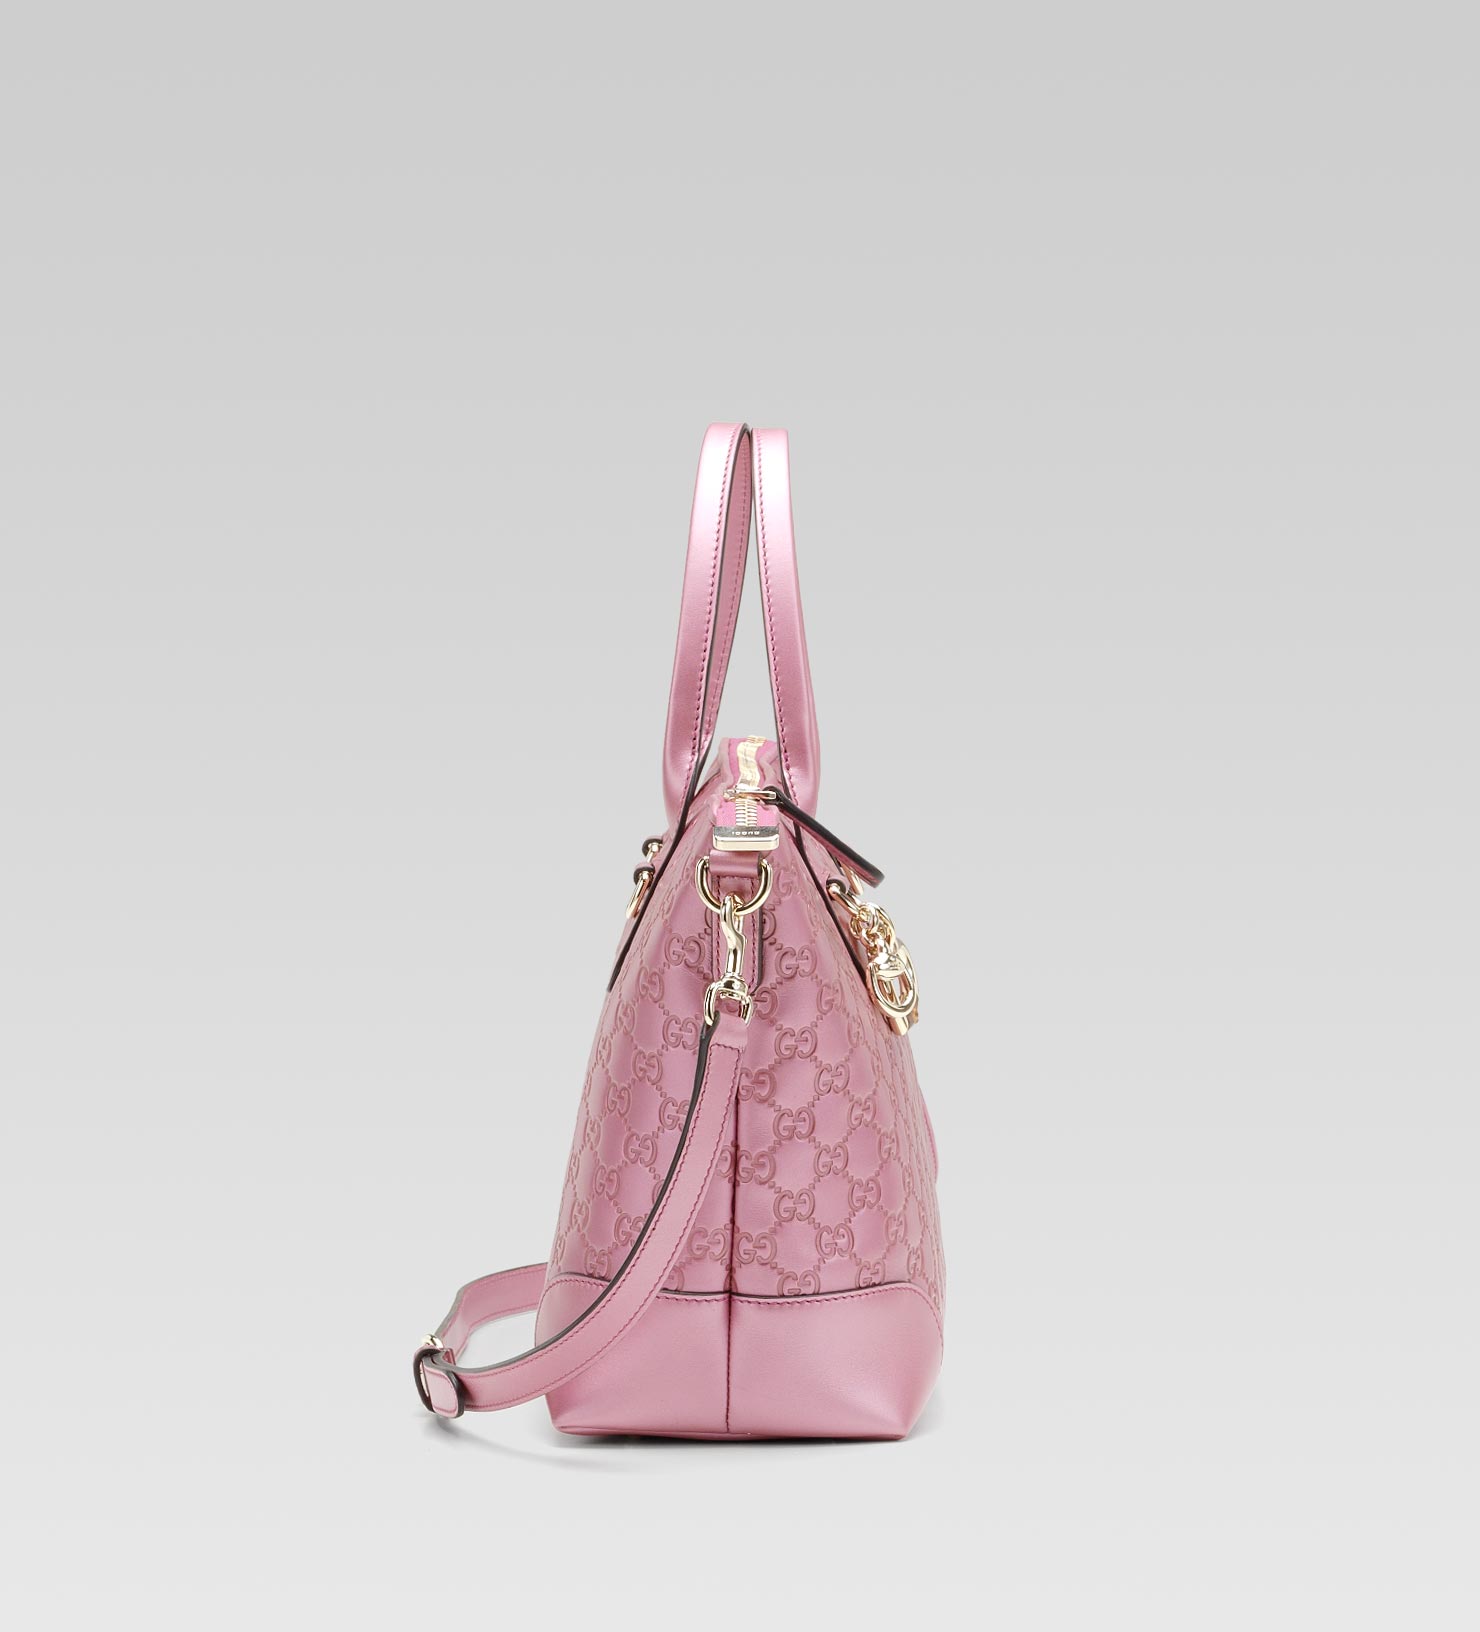 Gucci Heart Bit Charm Top Handle Bag in Rose (Pink) - Lyst